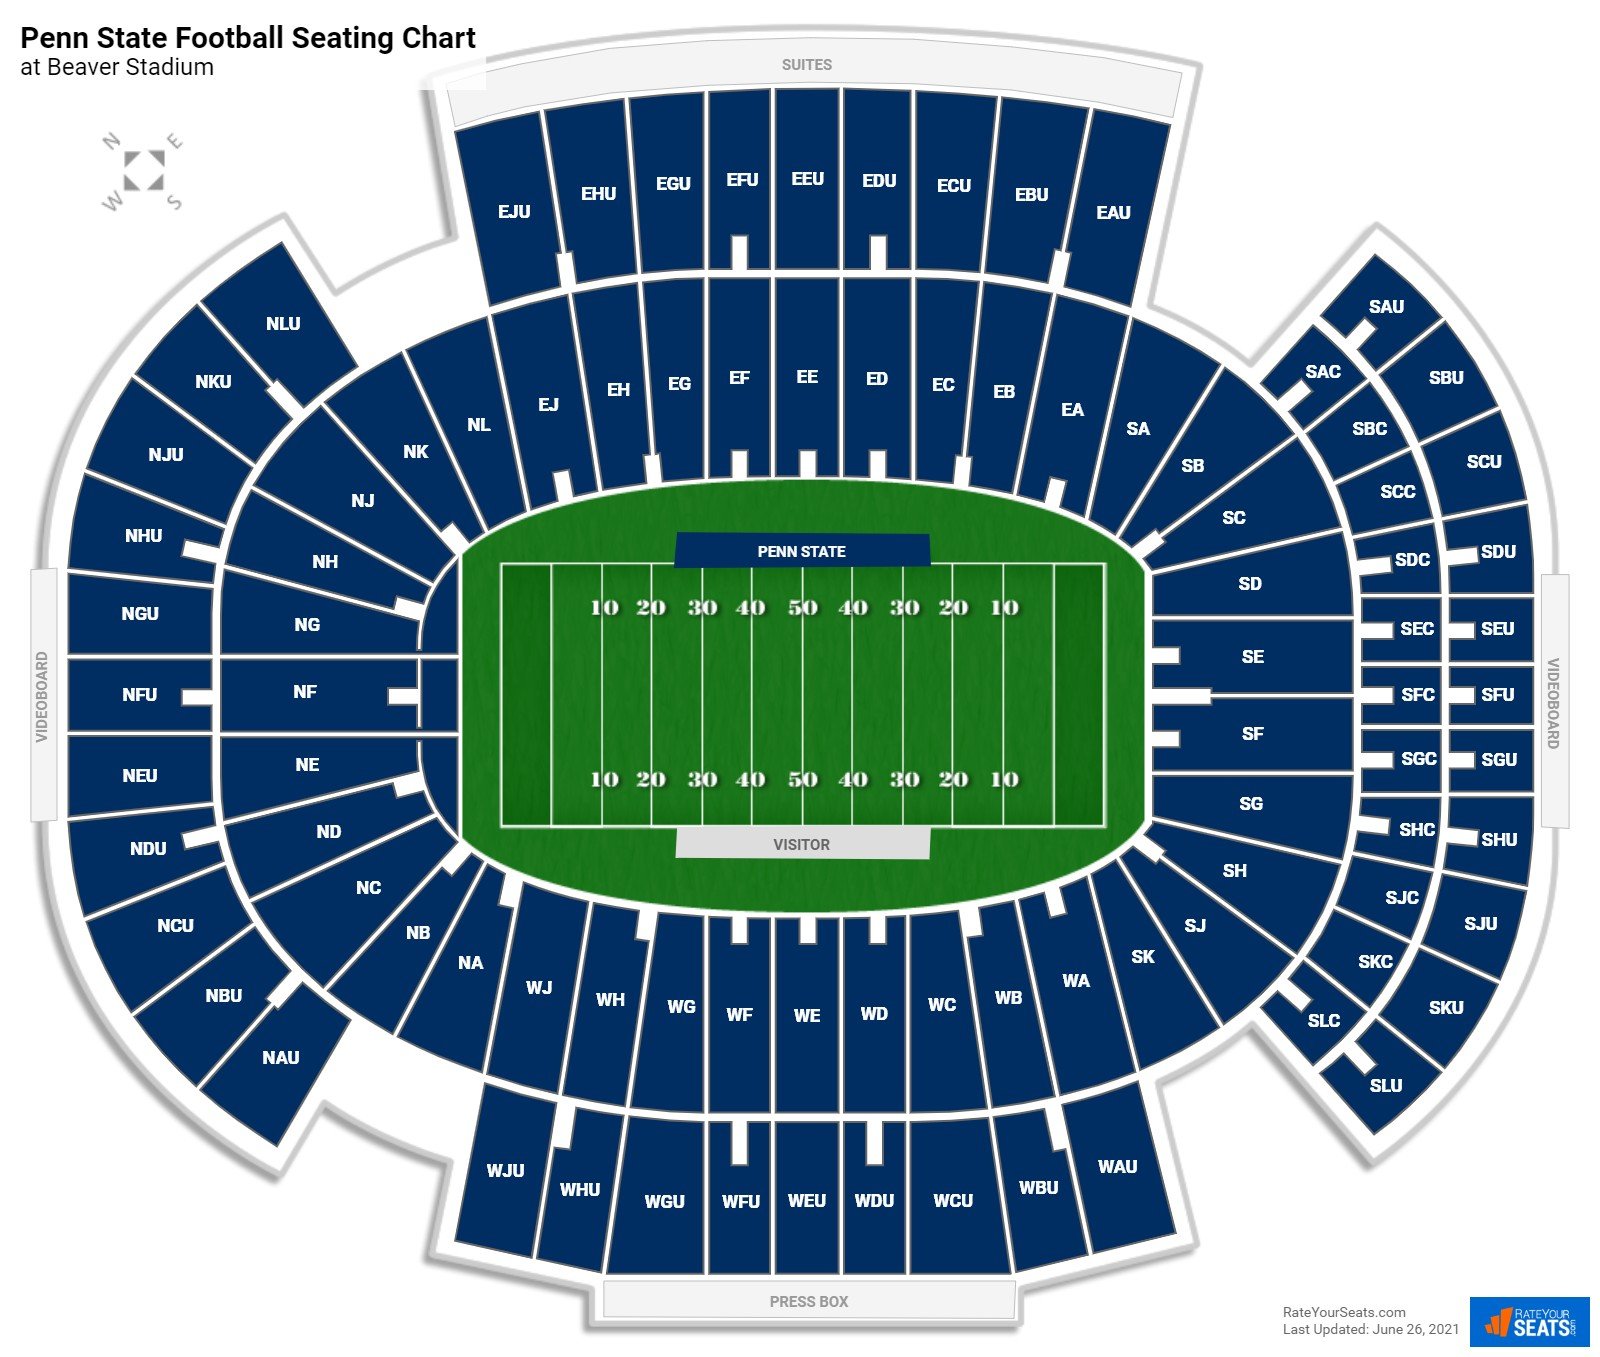 Penn State Nittany Lions Seating Chart at Beaver Stadium.